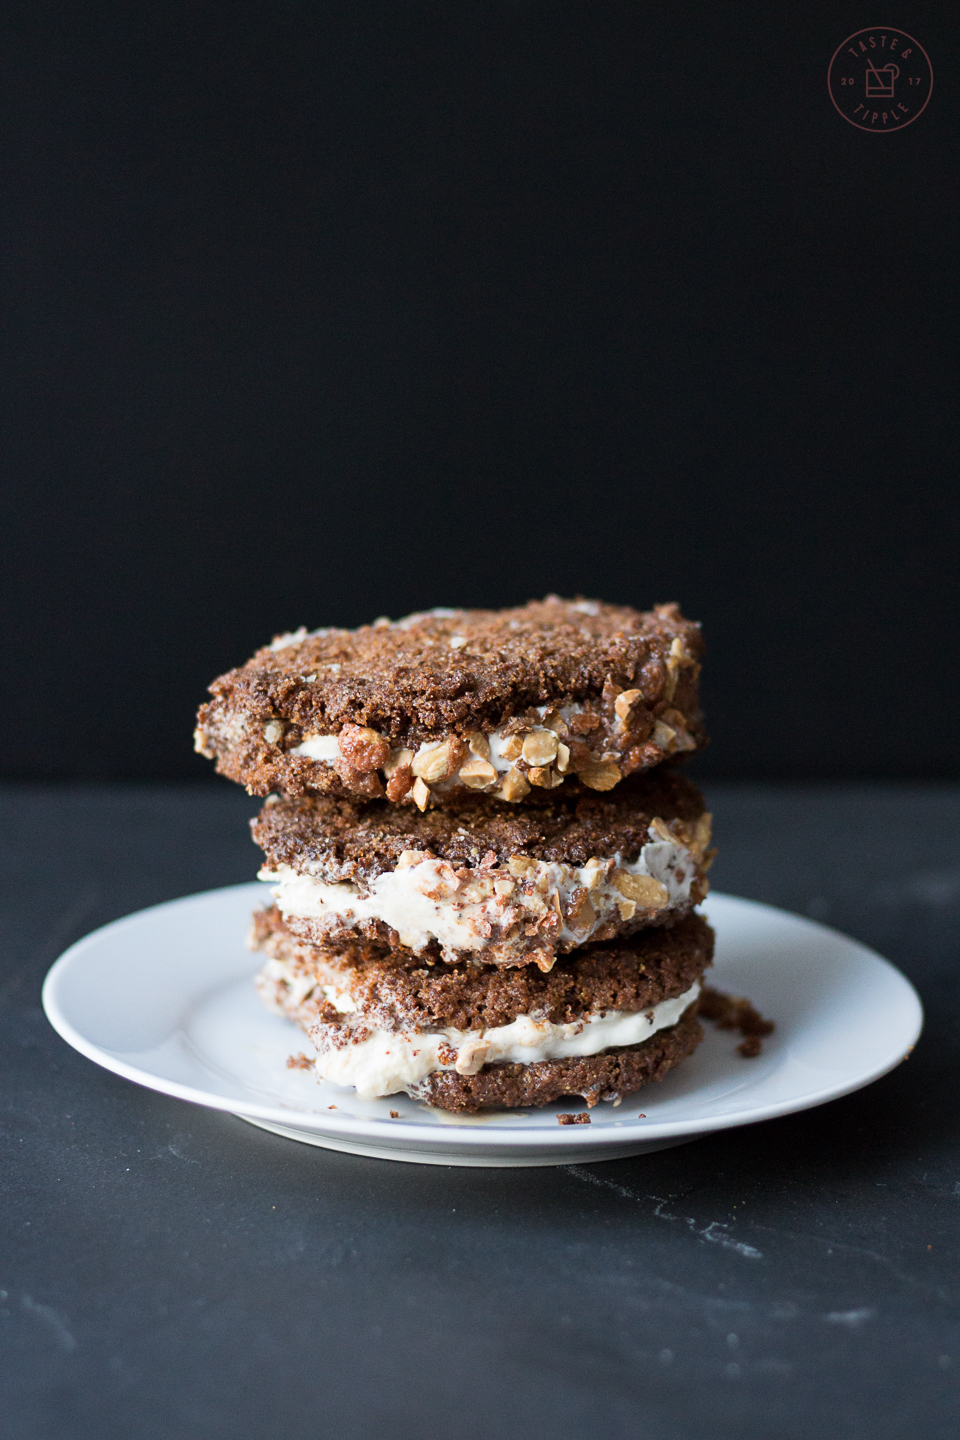 Peanut Butter and Banana Ice Cream Sandwiches | Taste and Tipple